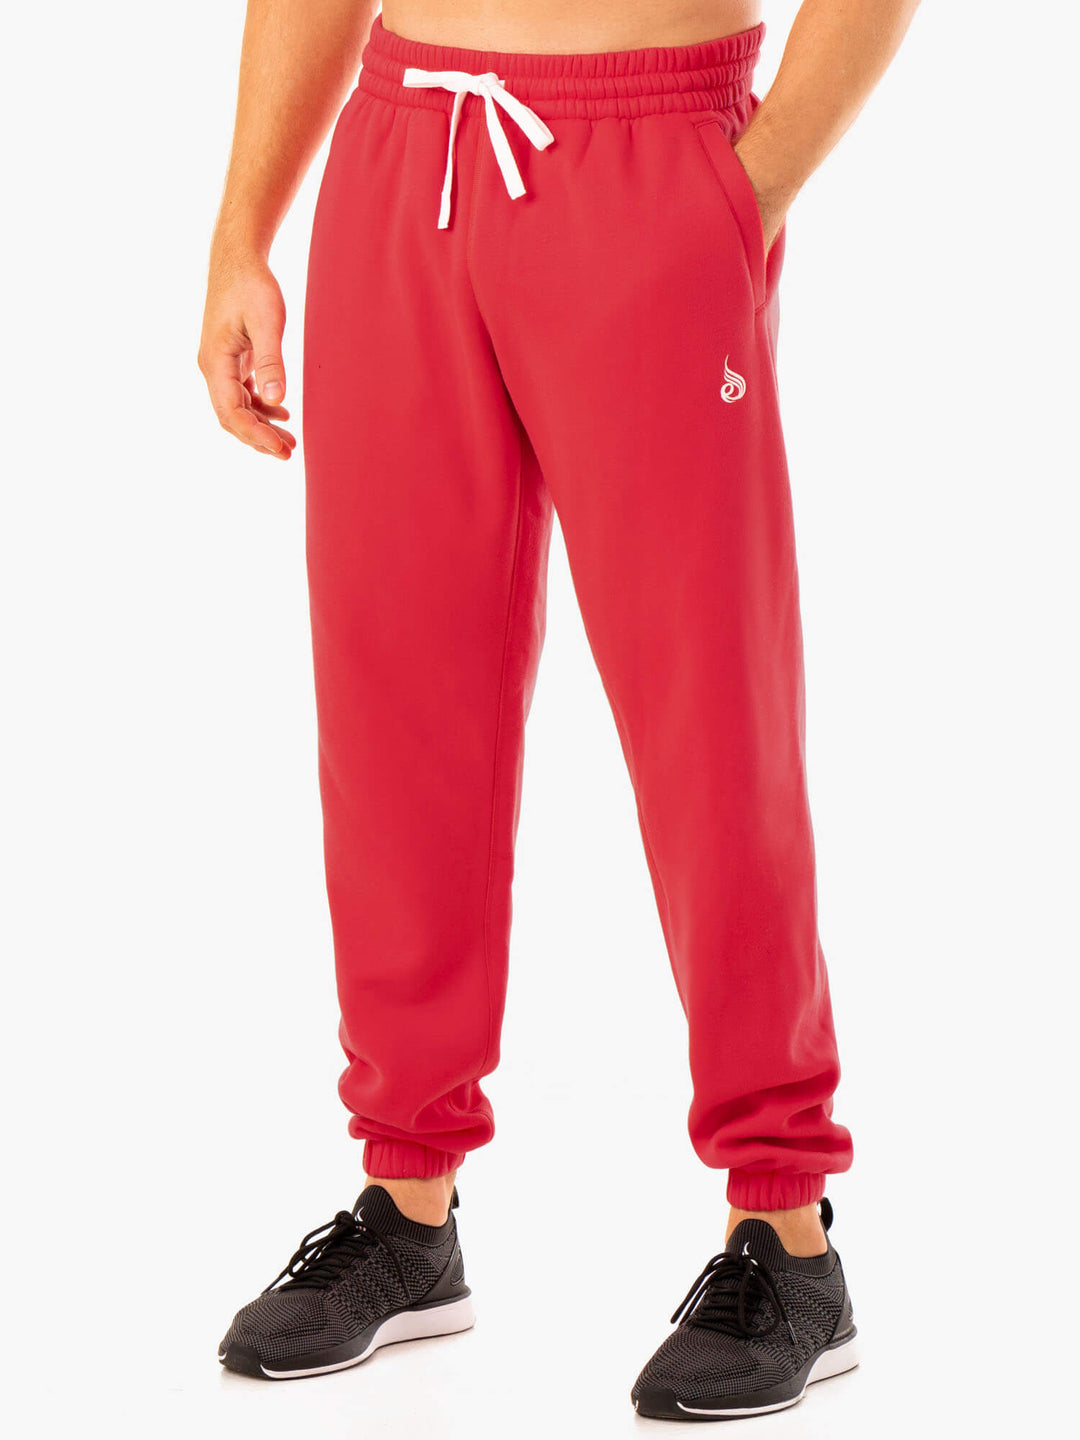 Baggy track pants/trousers